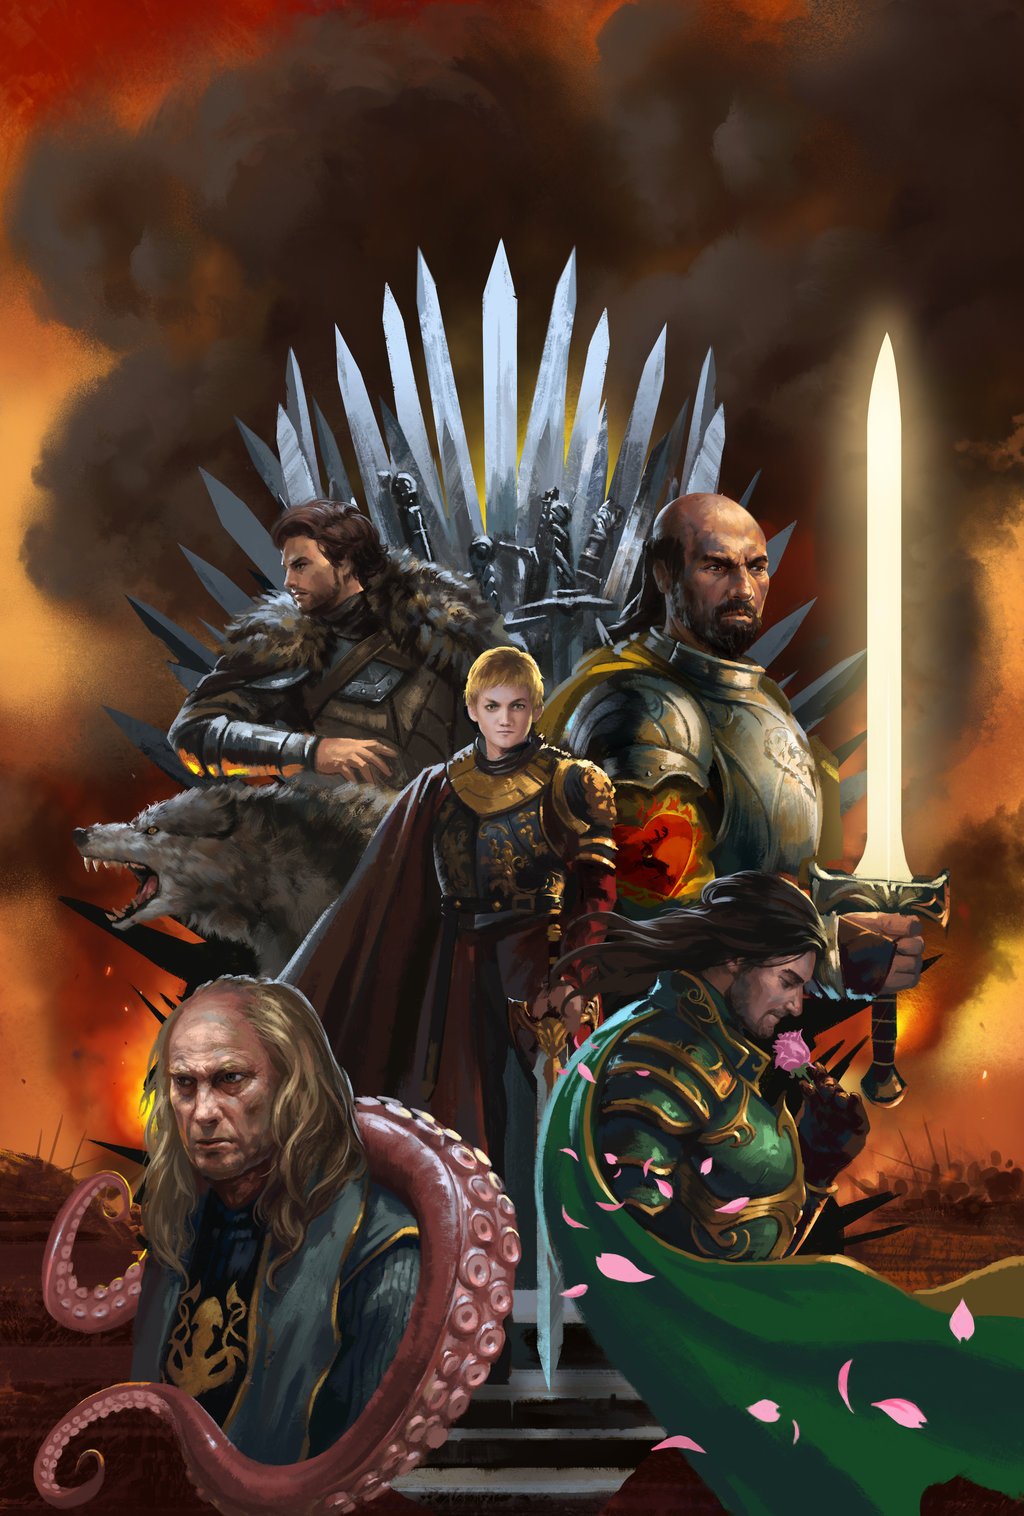 War of the Five Kings - A Wiki of Ice and Fire